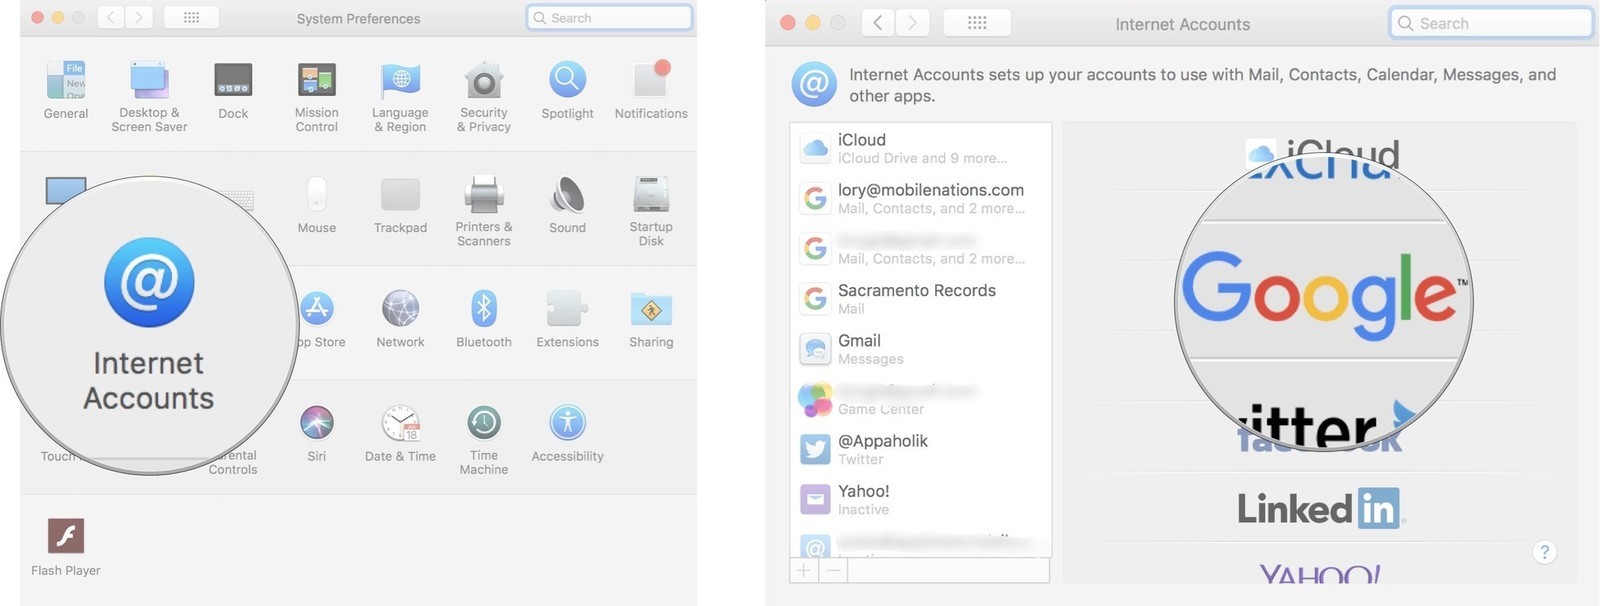 Gmail Chat App For Mac